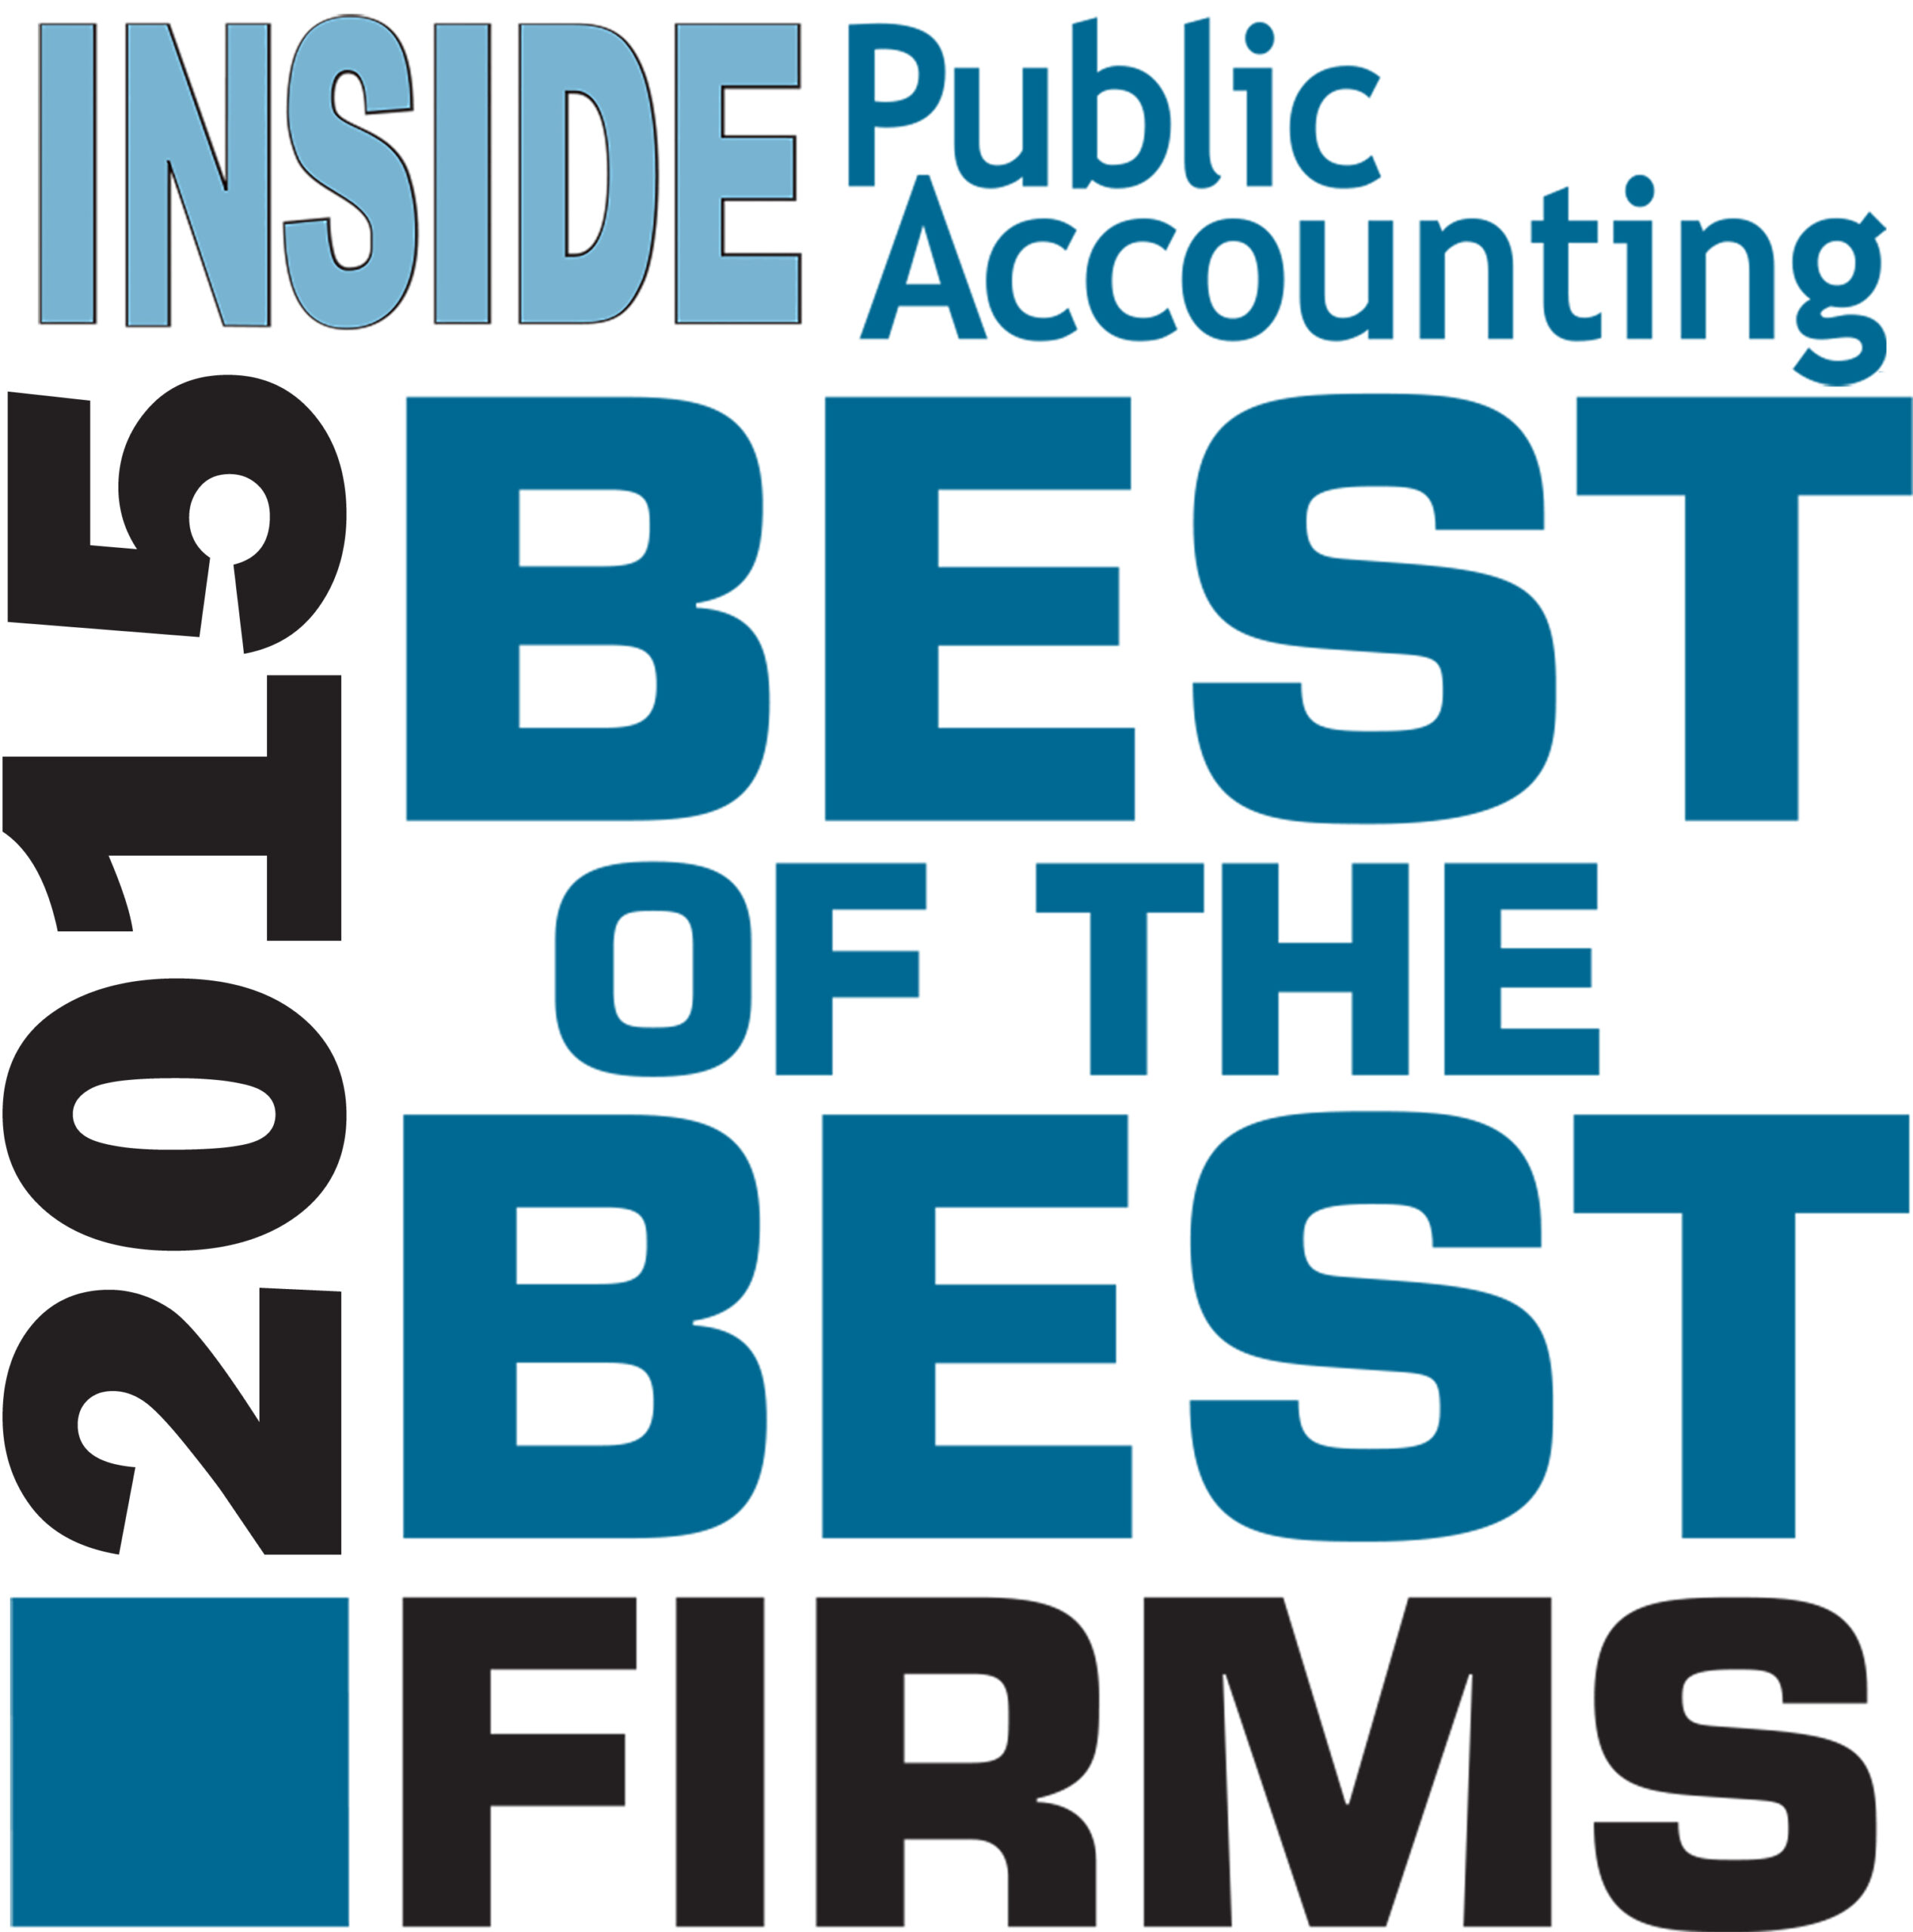 RRBB Accountants & Advisors named in IPA’s ‘2015 Best of the Best’ Image